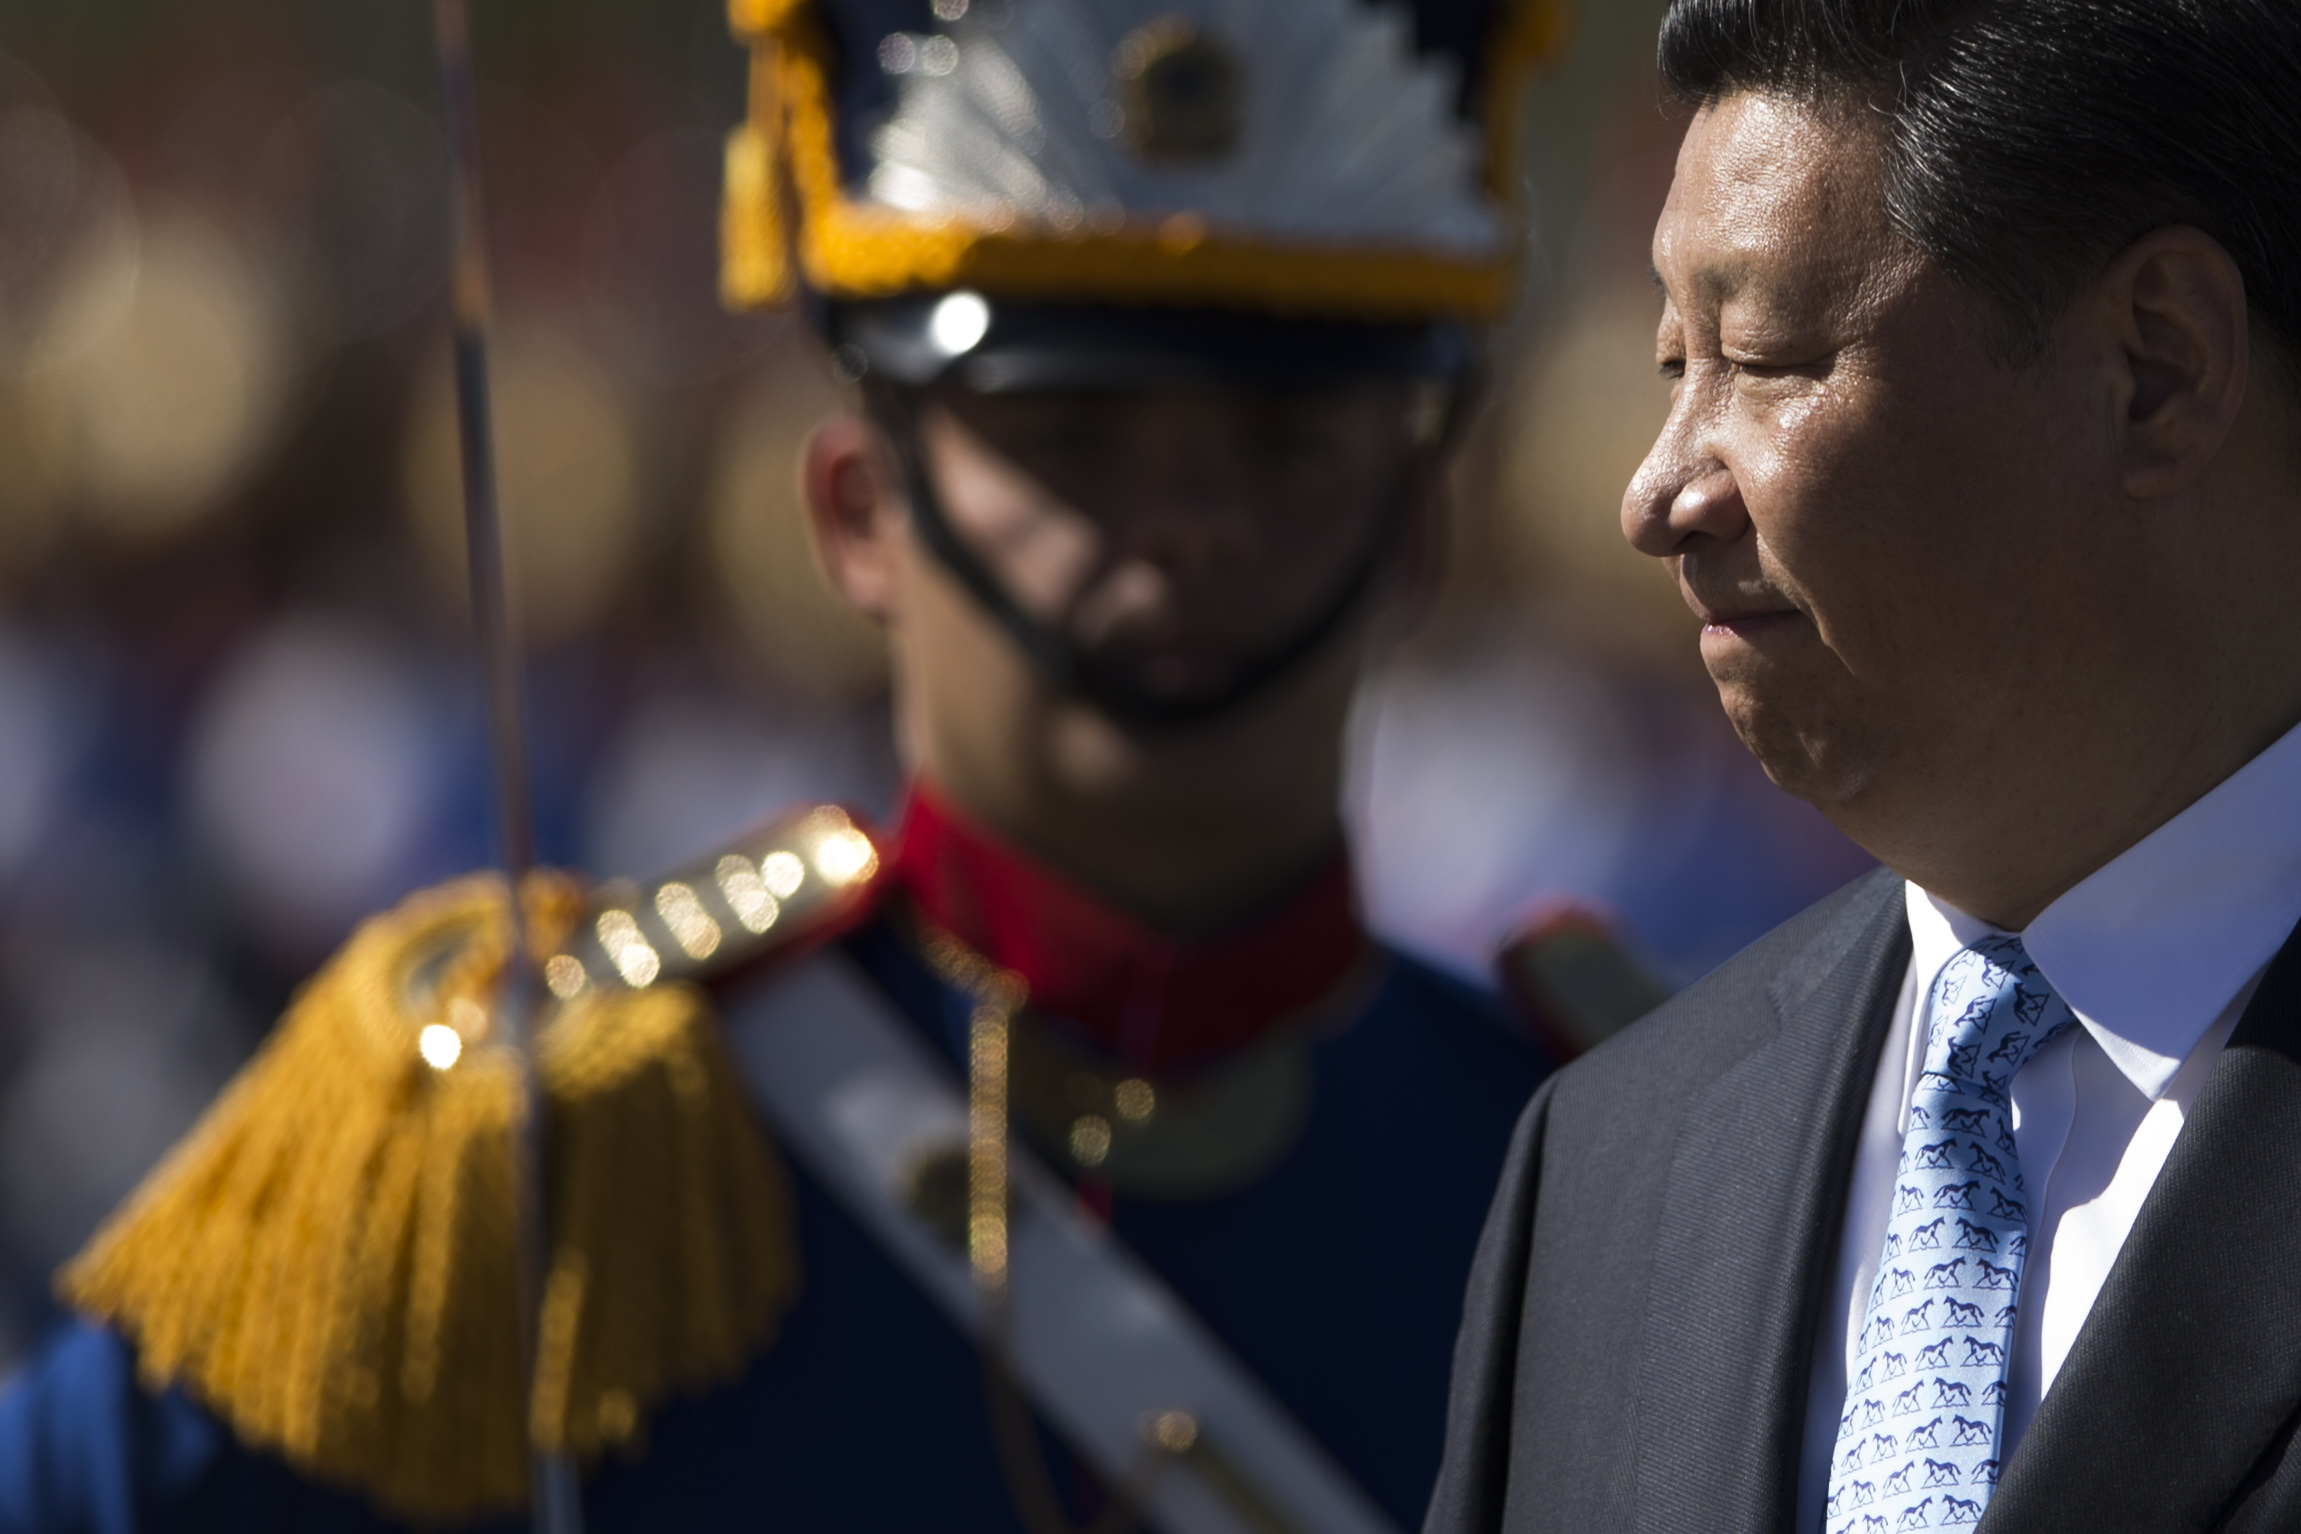 On his visit to South America, Xi Jinping signed a slew of trade and investment agreements. Photo: AP